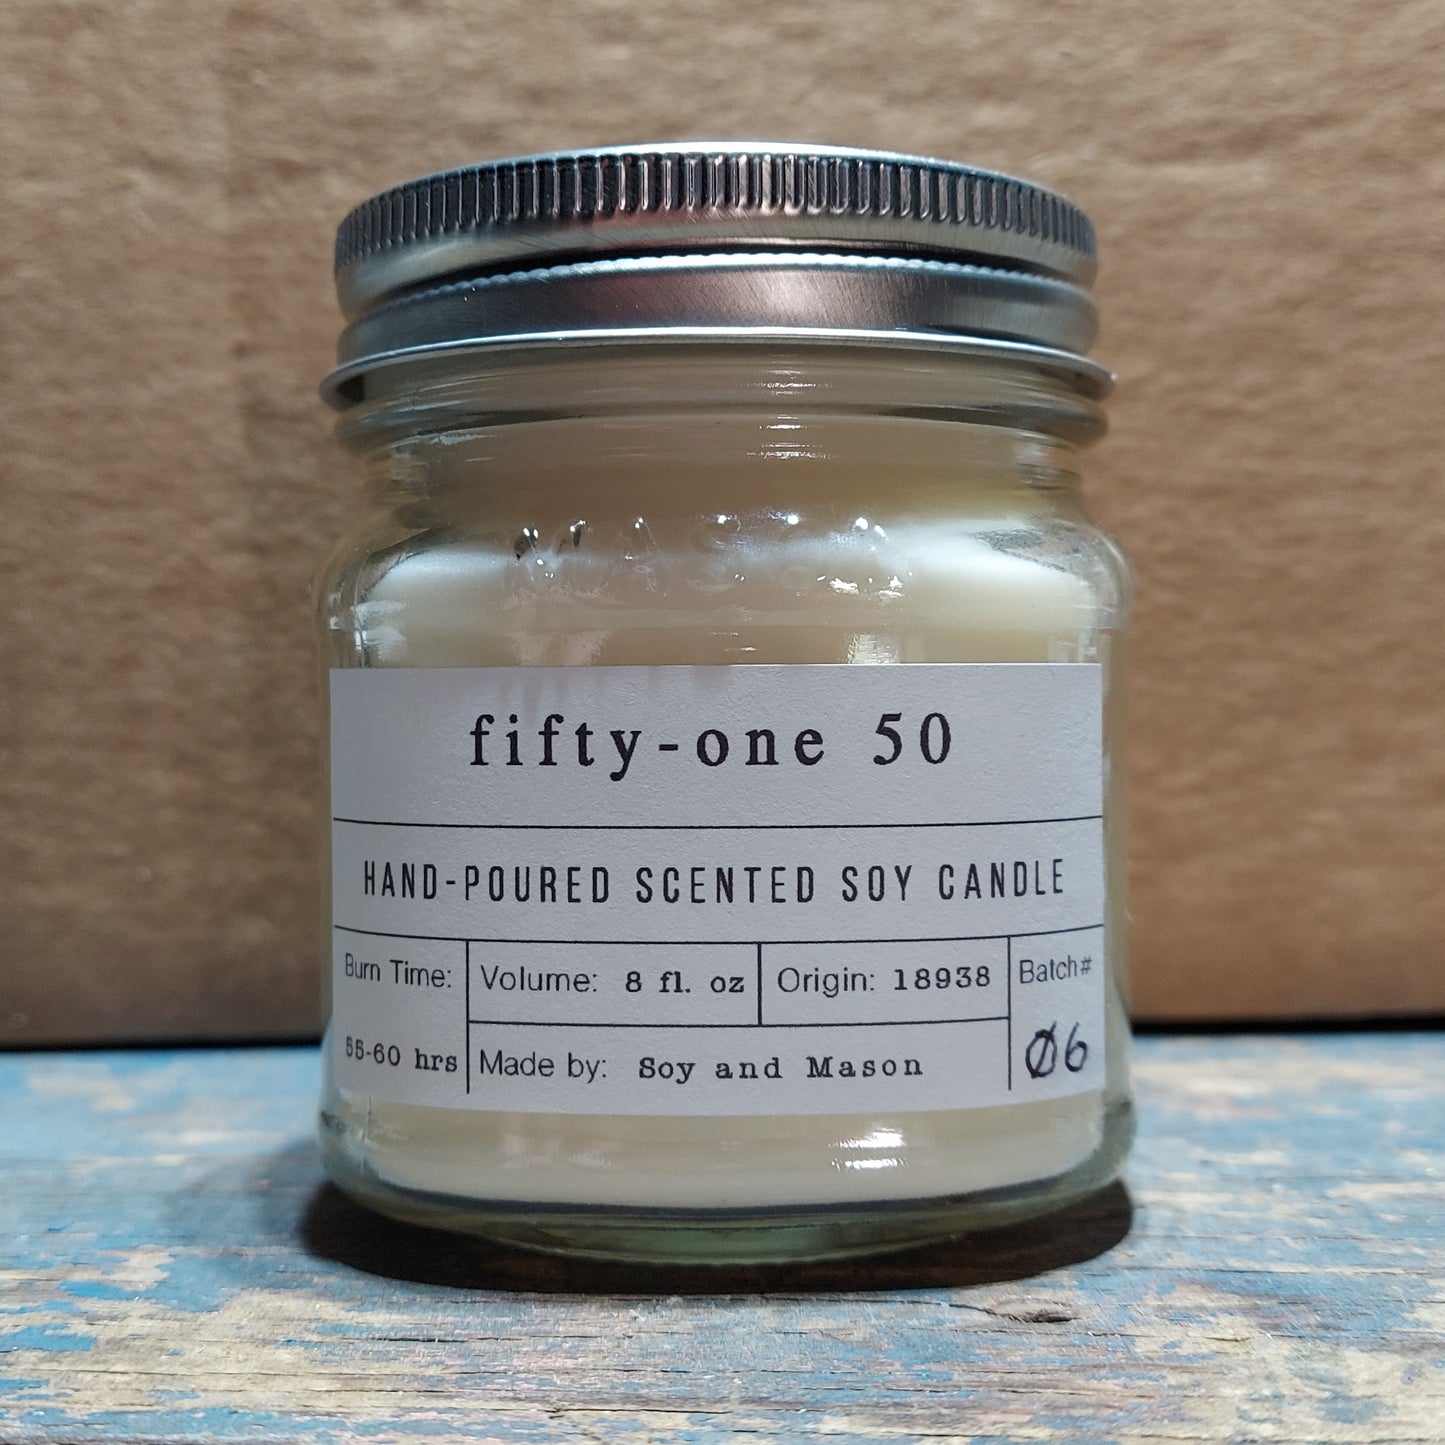 Fifty-one 50